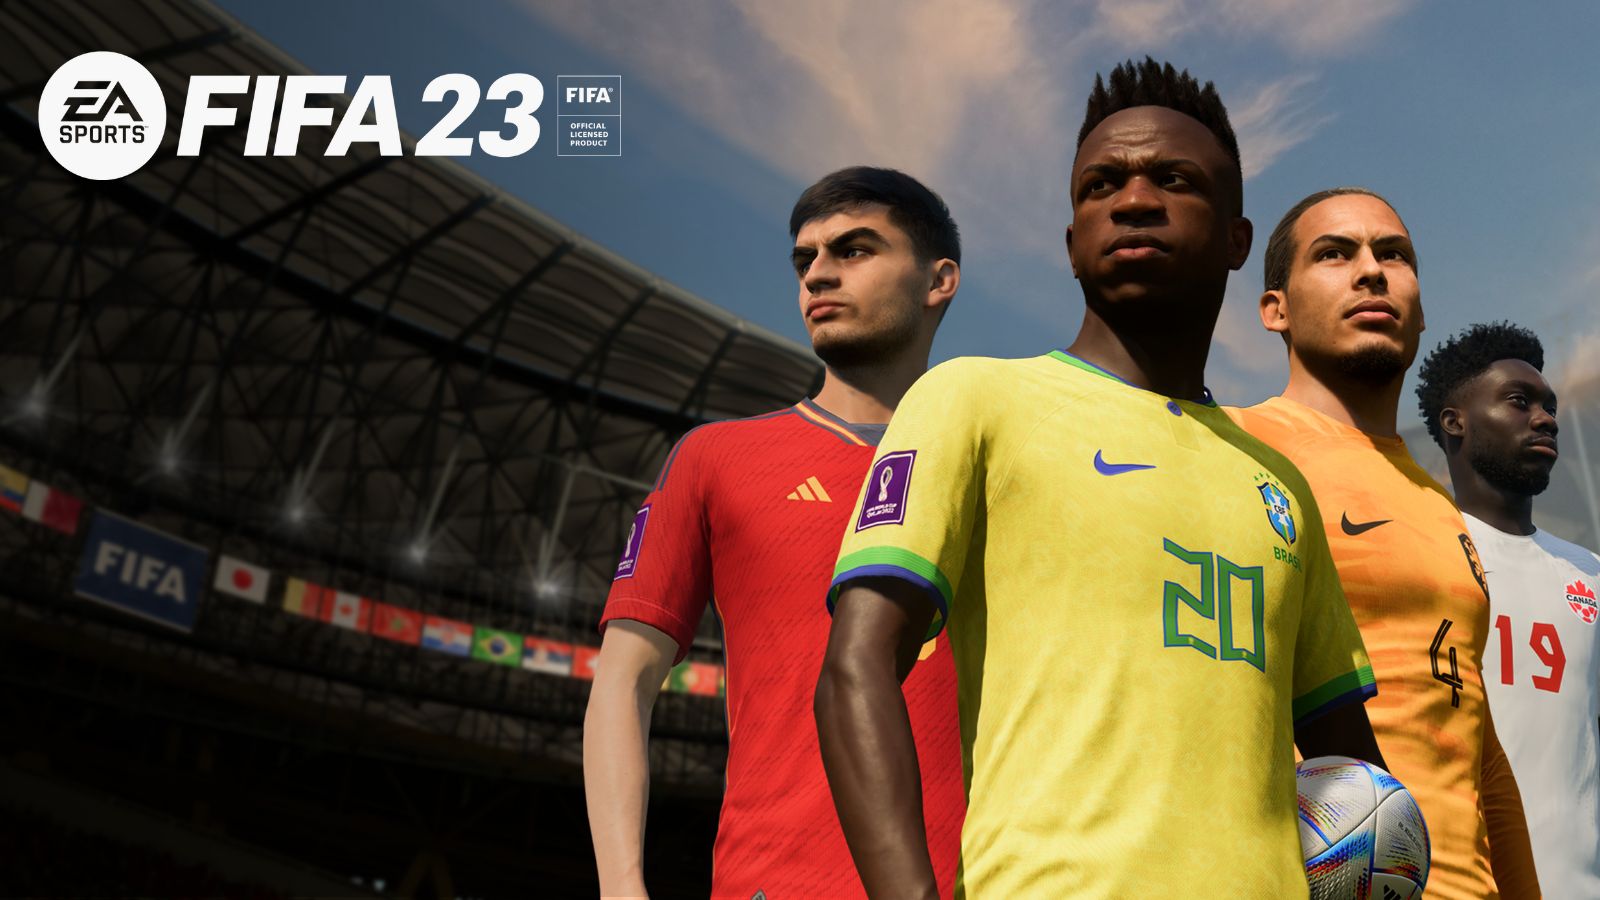 FIFA 23 players slam EA for “shameful” World Cup Swaps restrictions